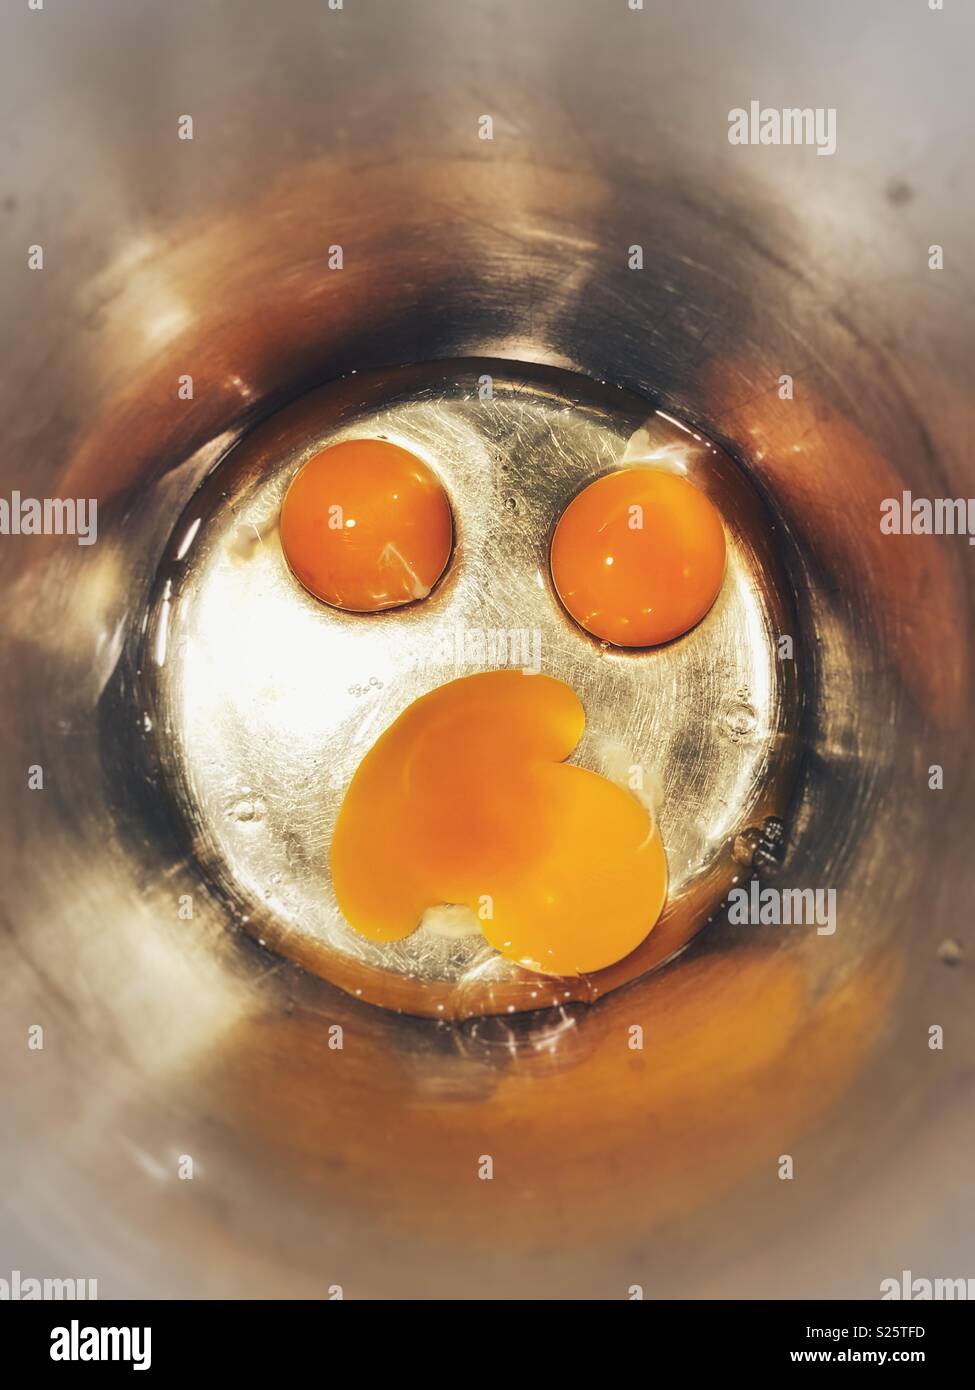 The yolk falls into a frying pan from a cracked raw egg, split by the